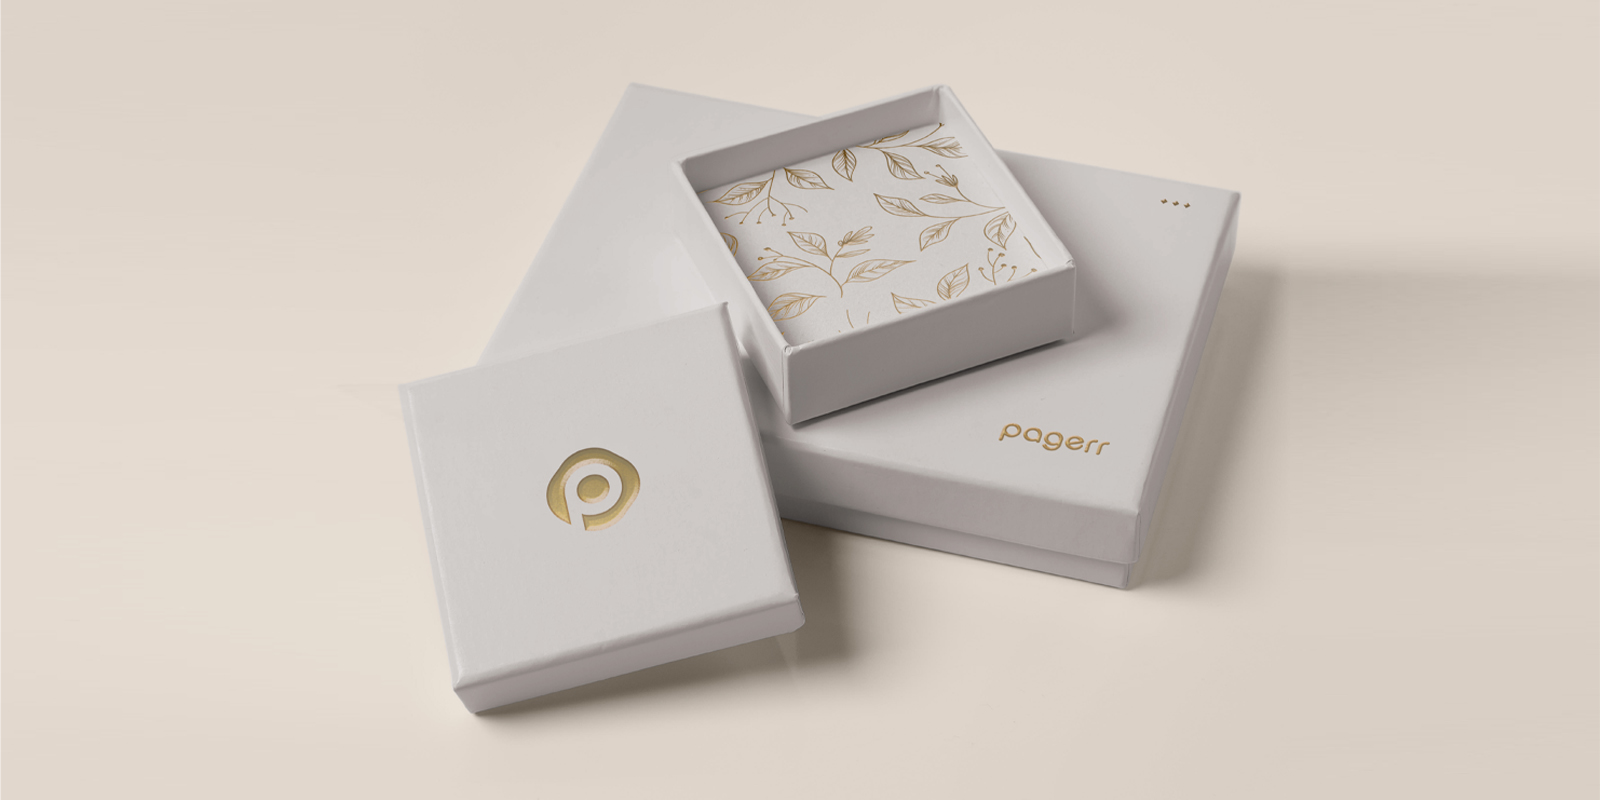 Product boxes in Barcelona - Print with Pagerr